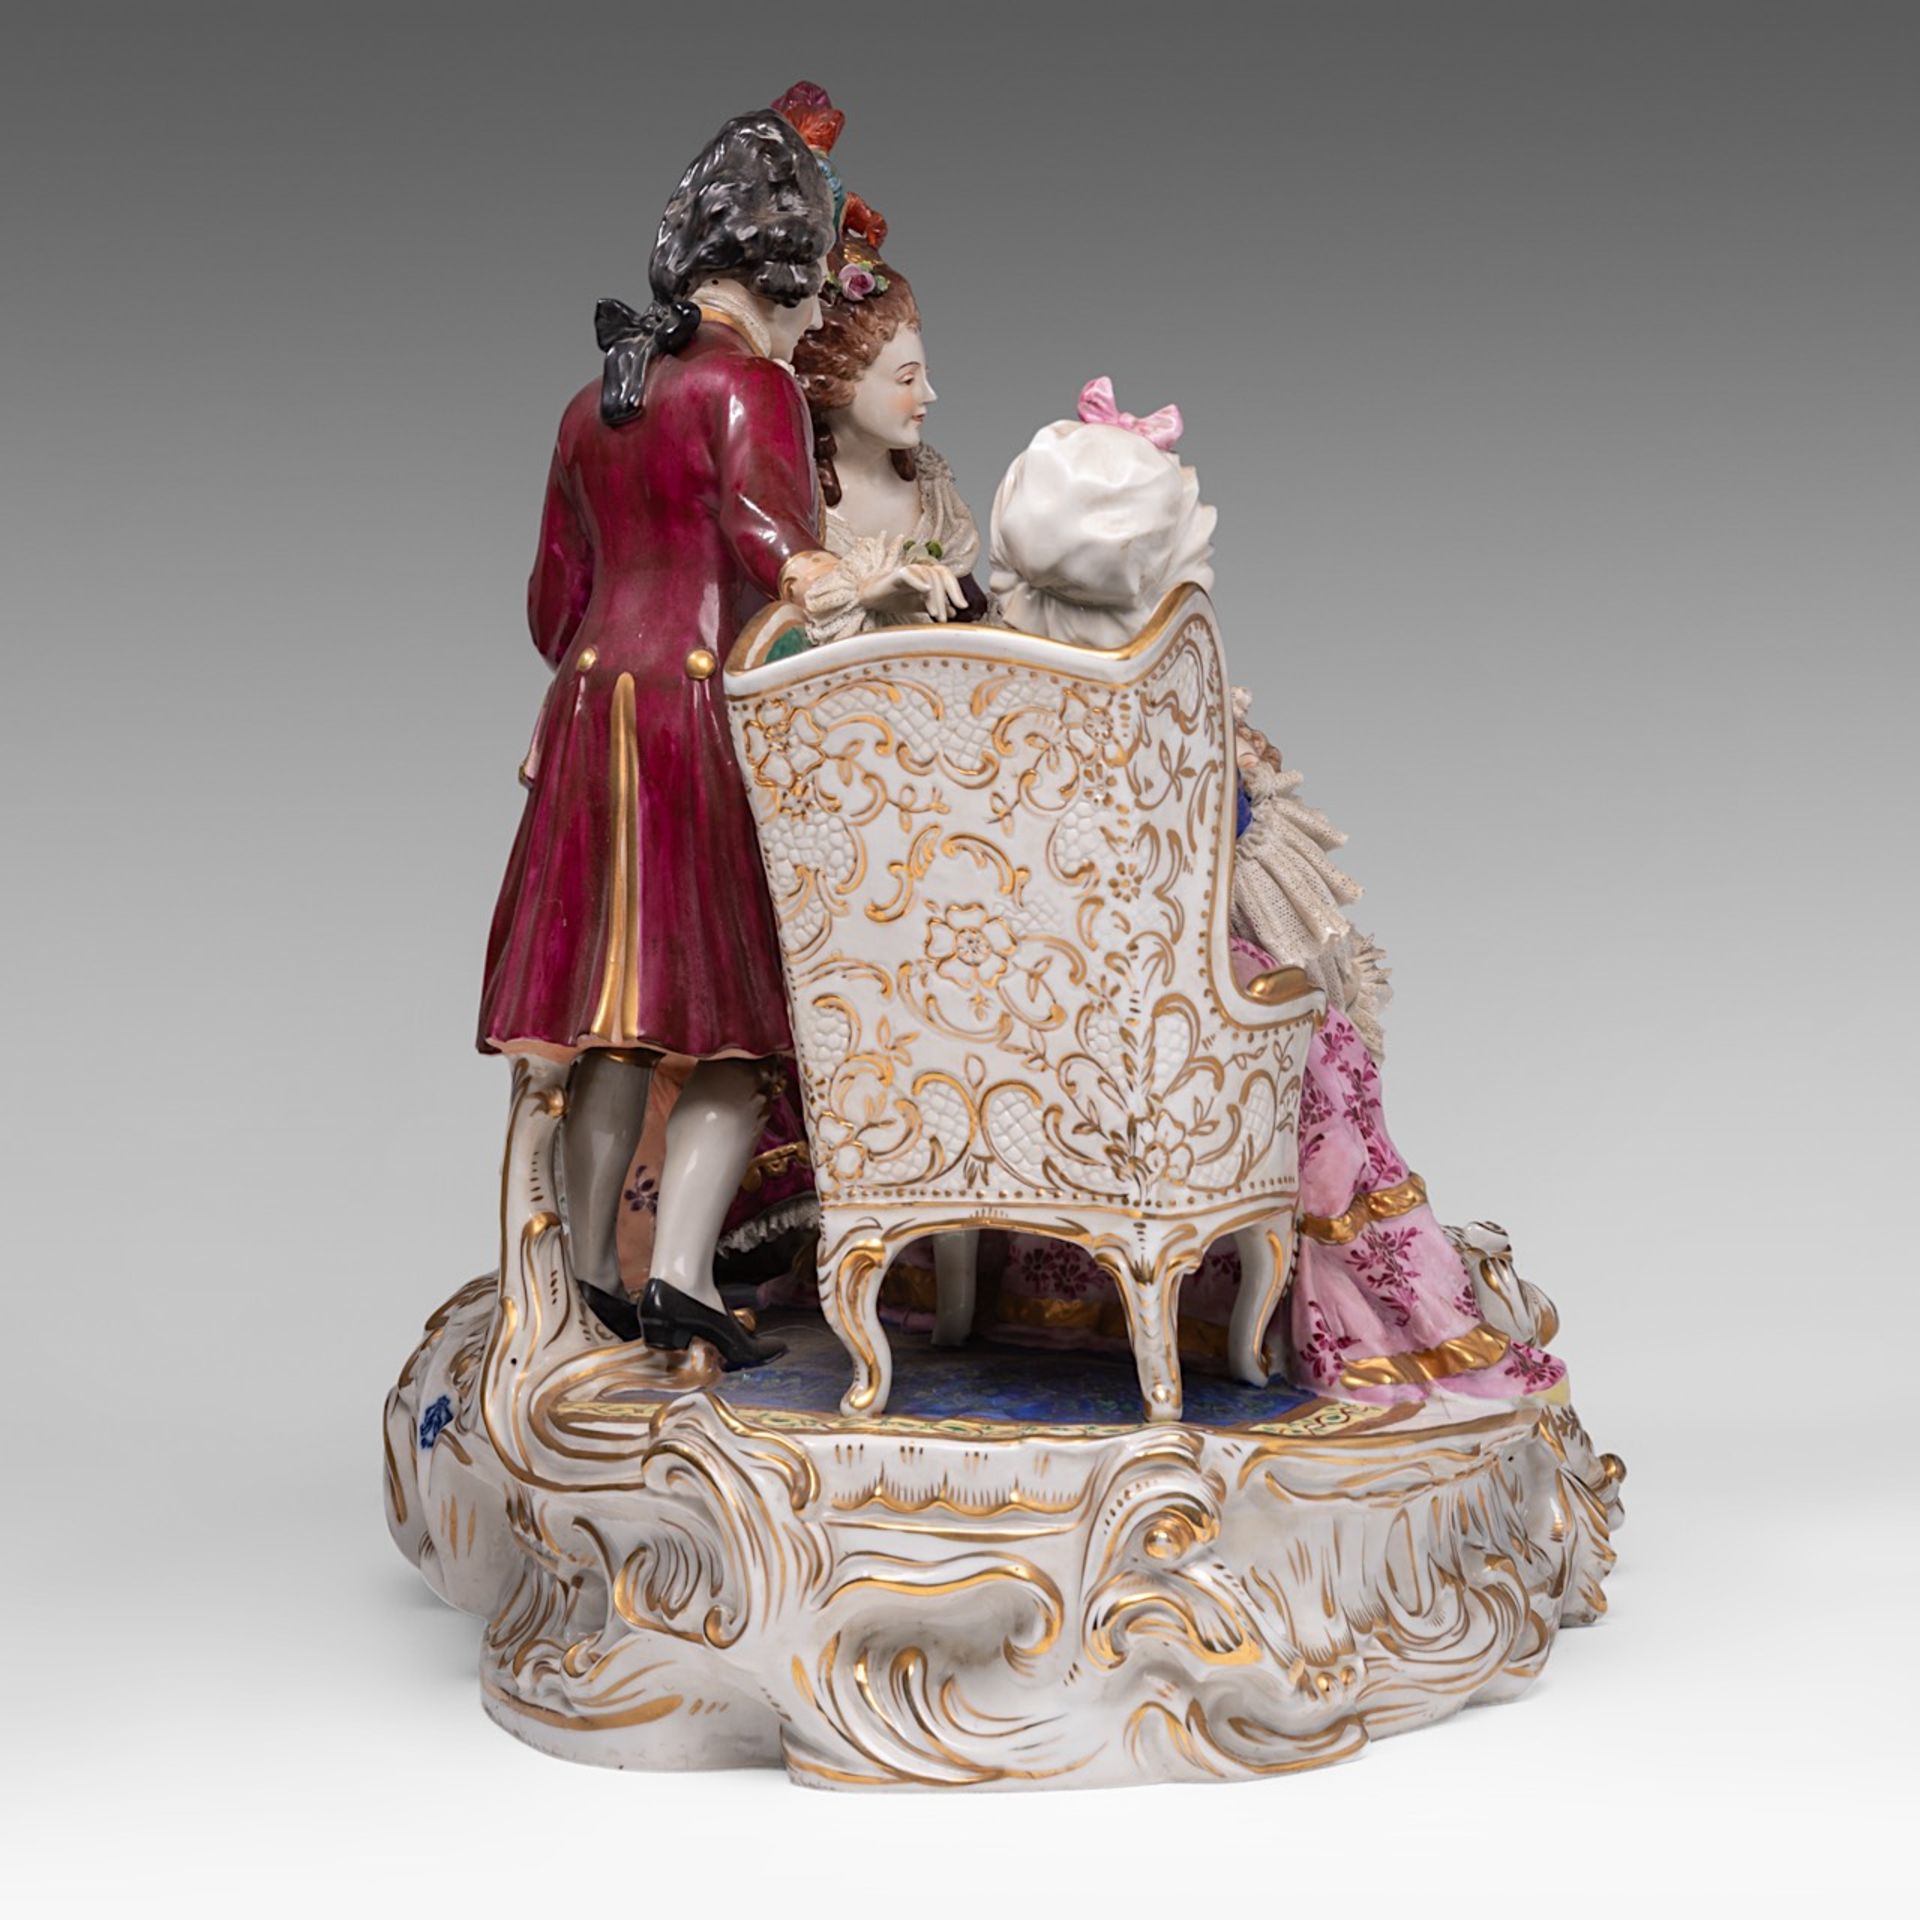 A large Saxony polychrome porcelain group depicting a gallant scene in a Rococo setting, H 40 - W 55 - Image 6 of 15